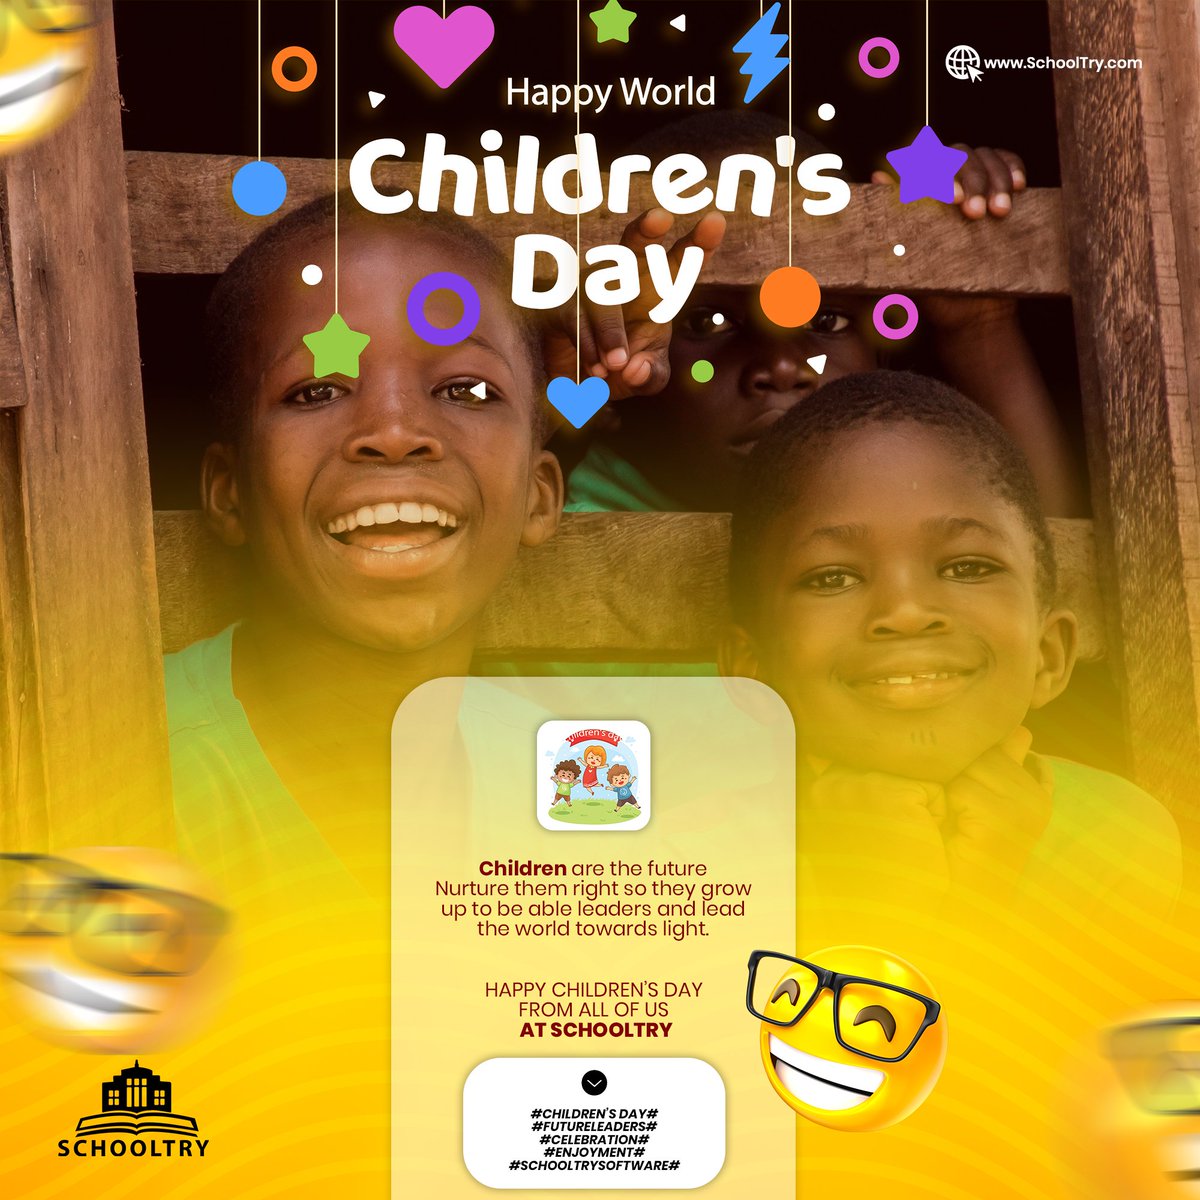 Children are the future. Nurture them right so they grow up to be able leaders and lead the world towards the light.

#children #nigeria #thechildrenoftheworld #childrensday #ict #edtech #academia #schoolmanagementsoftware #schooladministrators